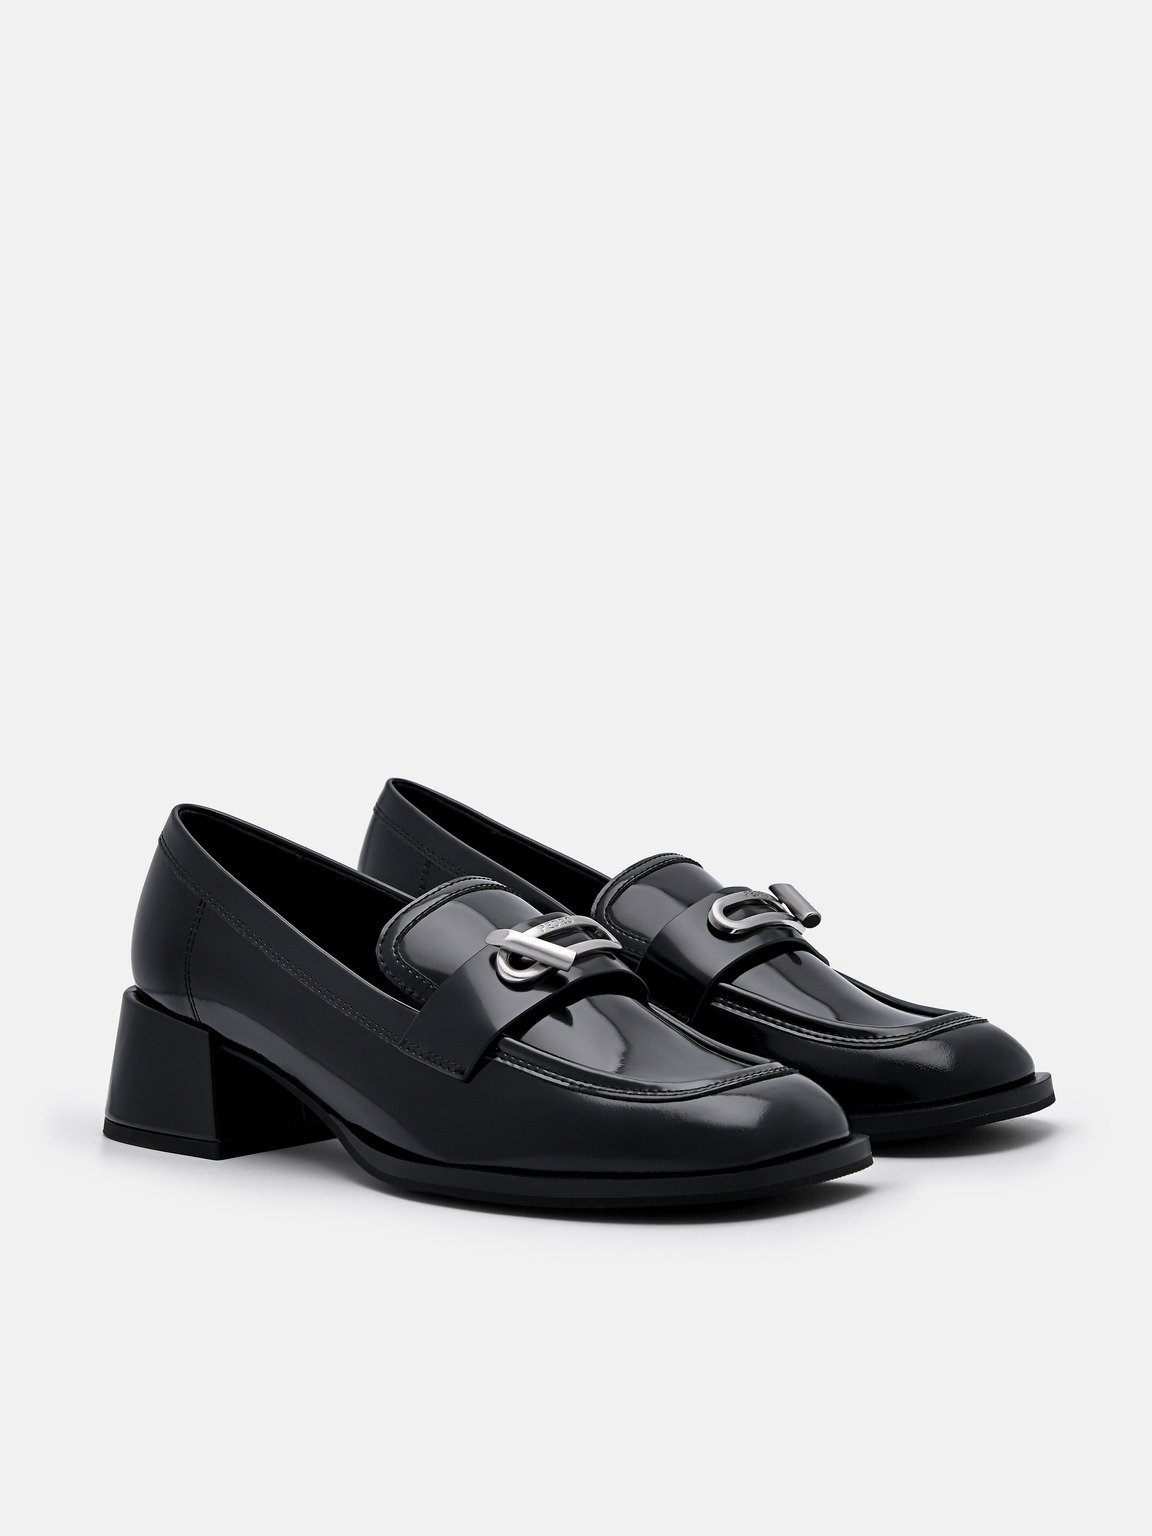 Brie Leather Heel Loafers, Black